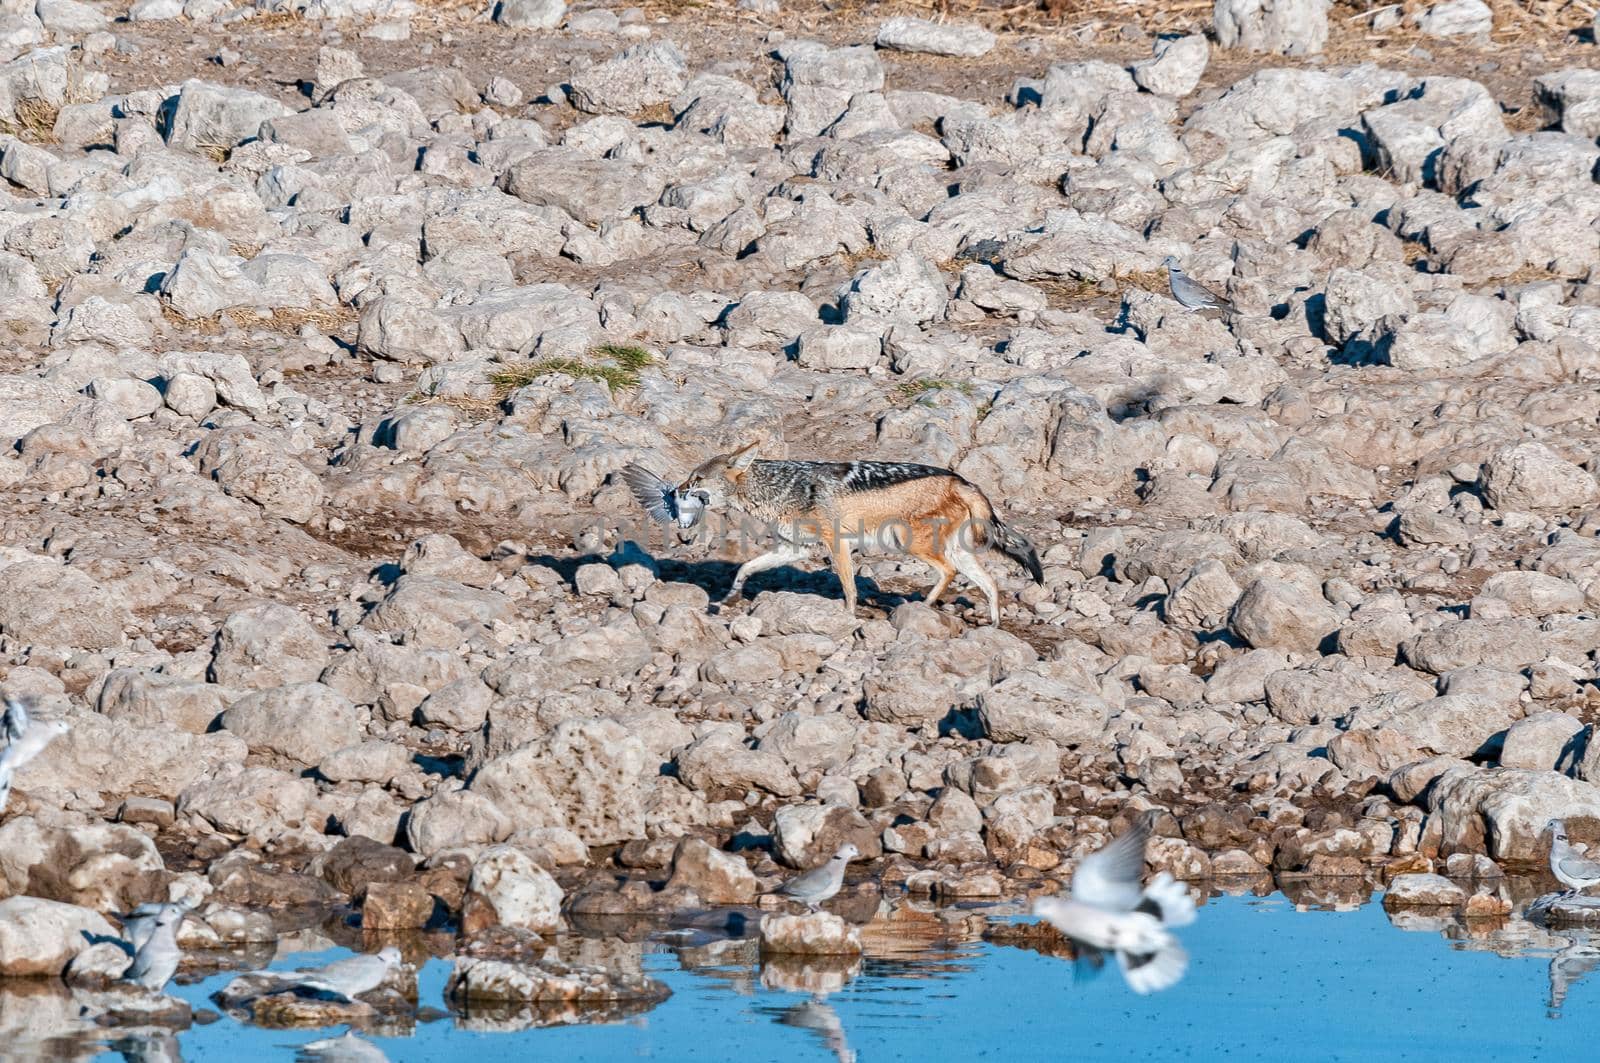 Black-backed jackal with its prey, a cape turtle dove by dpreezg